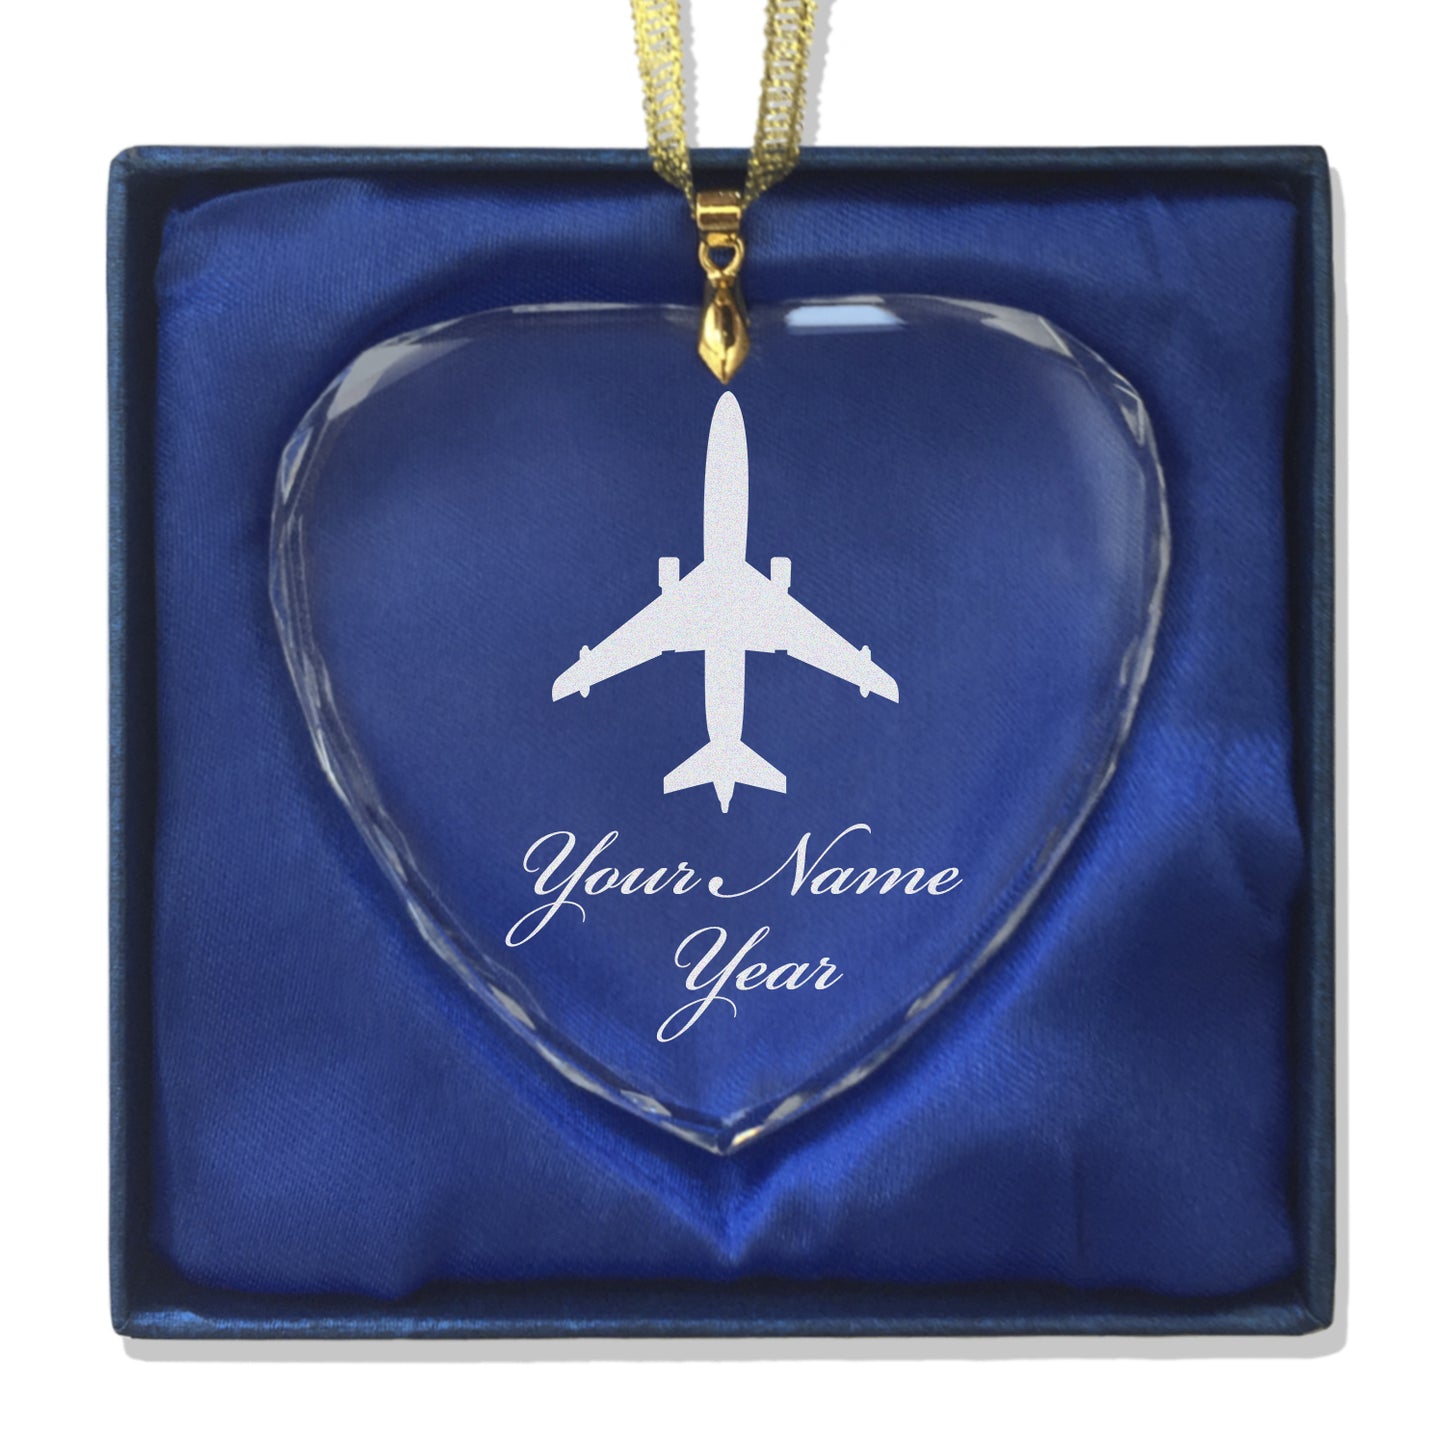 LaserGram Christmas Ornament, Jet Airplane, Personalized Engraving Included (Heart Shape)